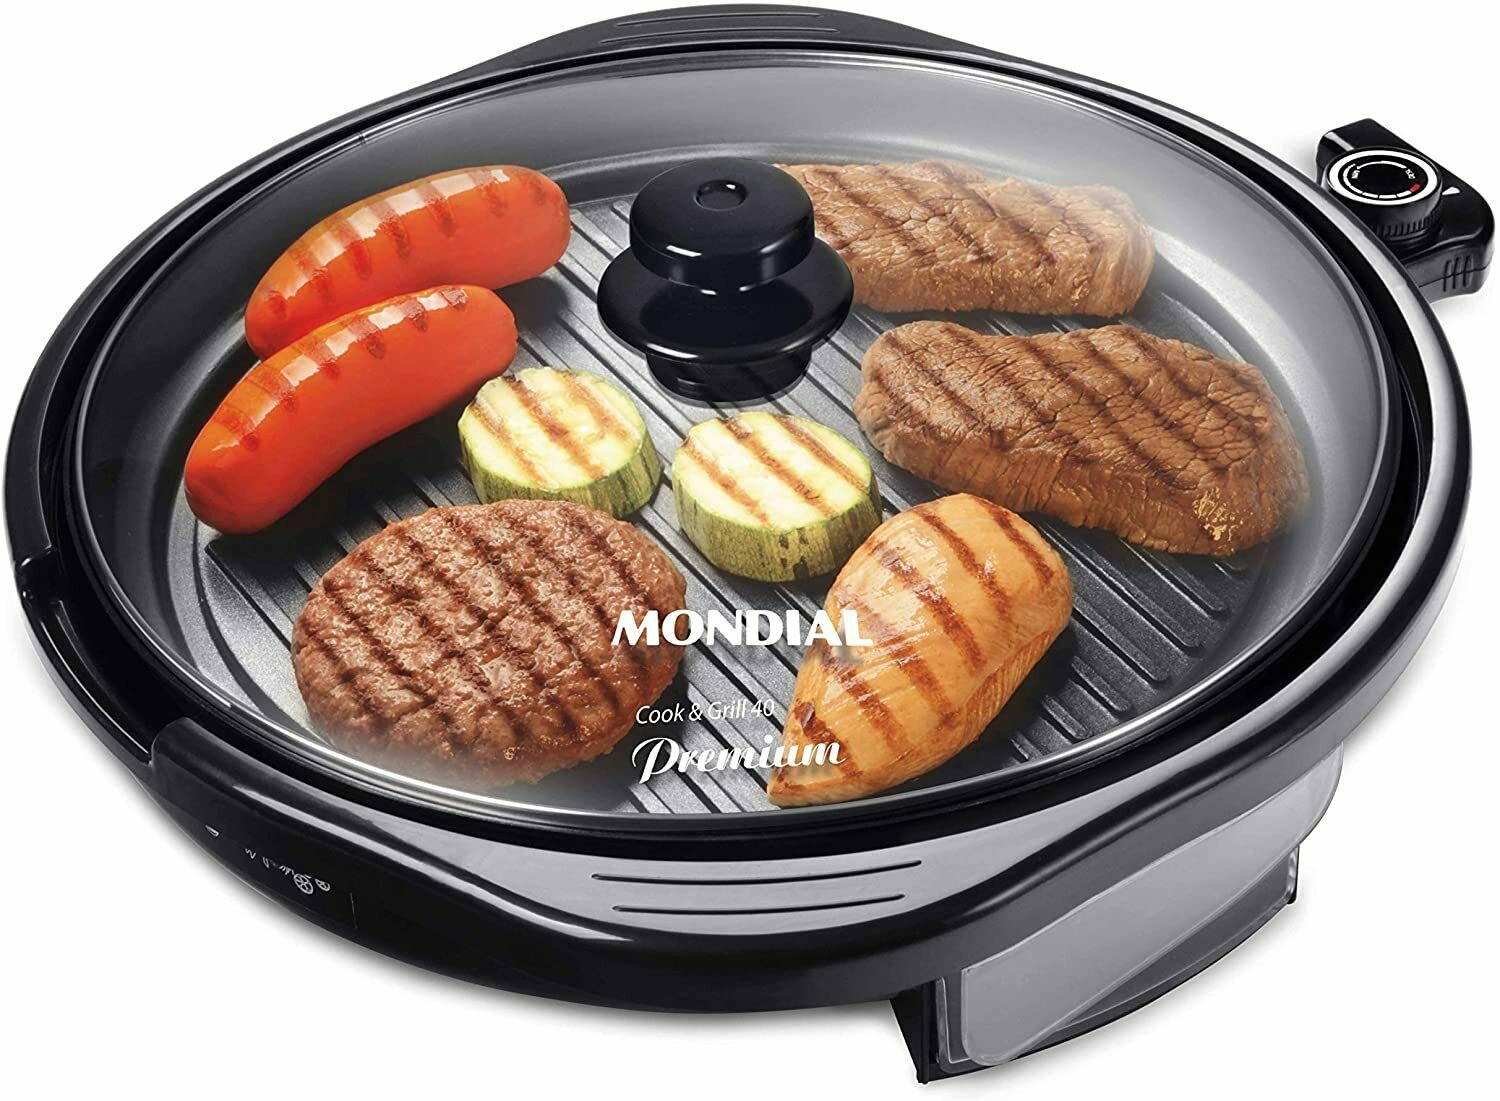 Mondial Cook & Grill - Electric Indoor Grill BBQ Cooker Portable 15in